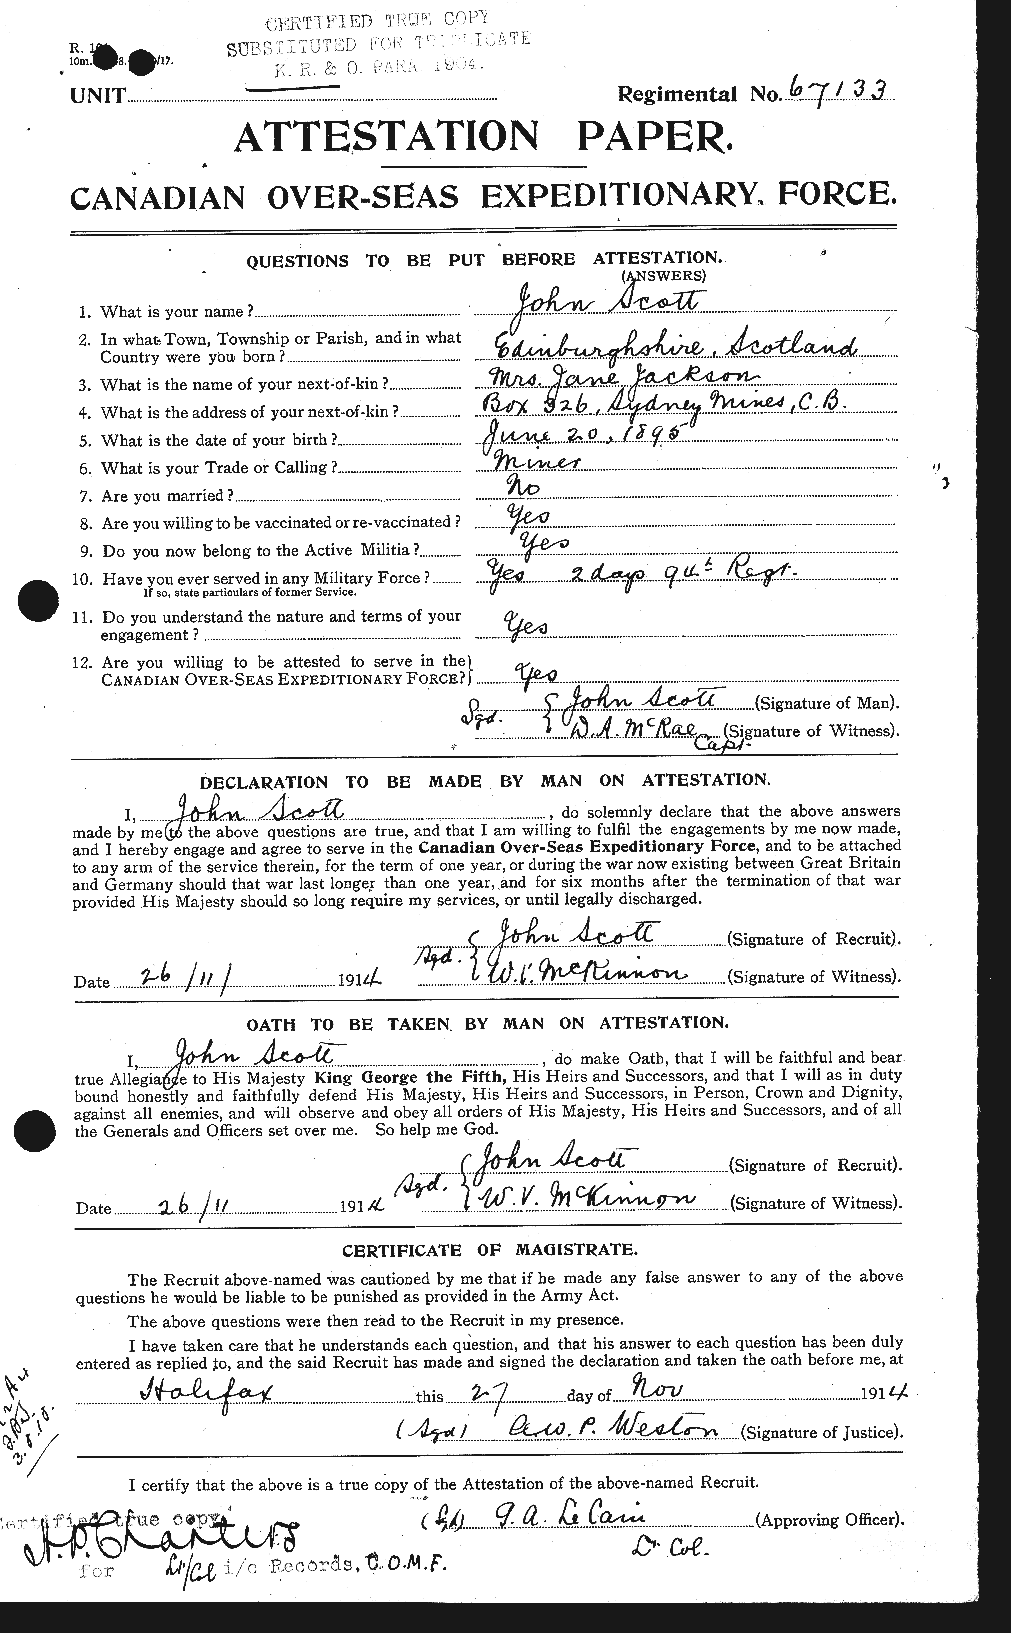 Personnel Records of the First World War - CEF 084904a